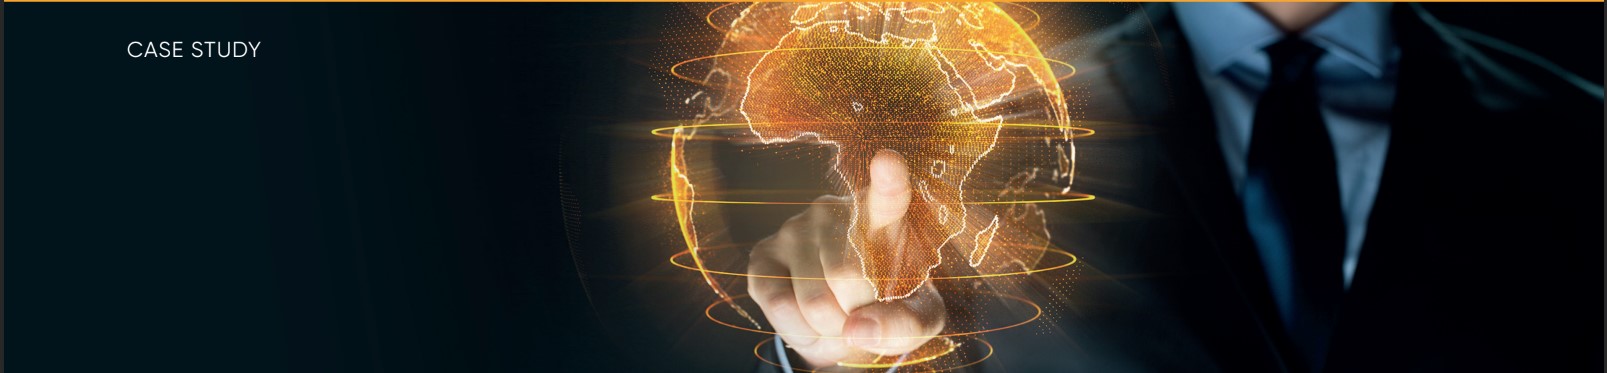 Commscloud Leverages floLIVE to enable reliable IoT Connectivity across africa